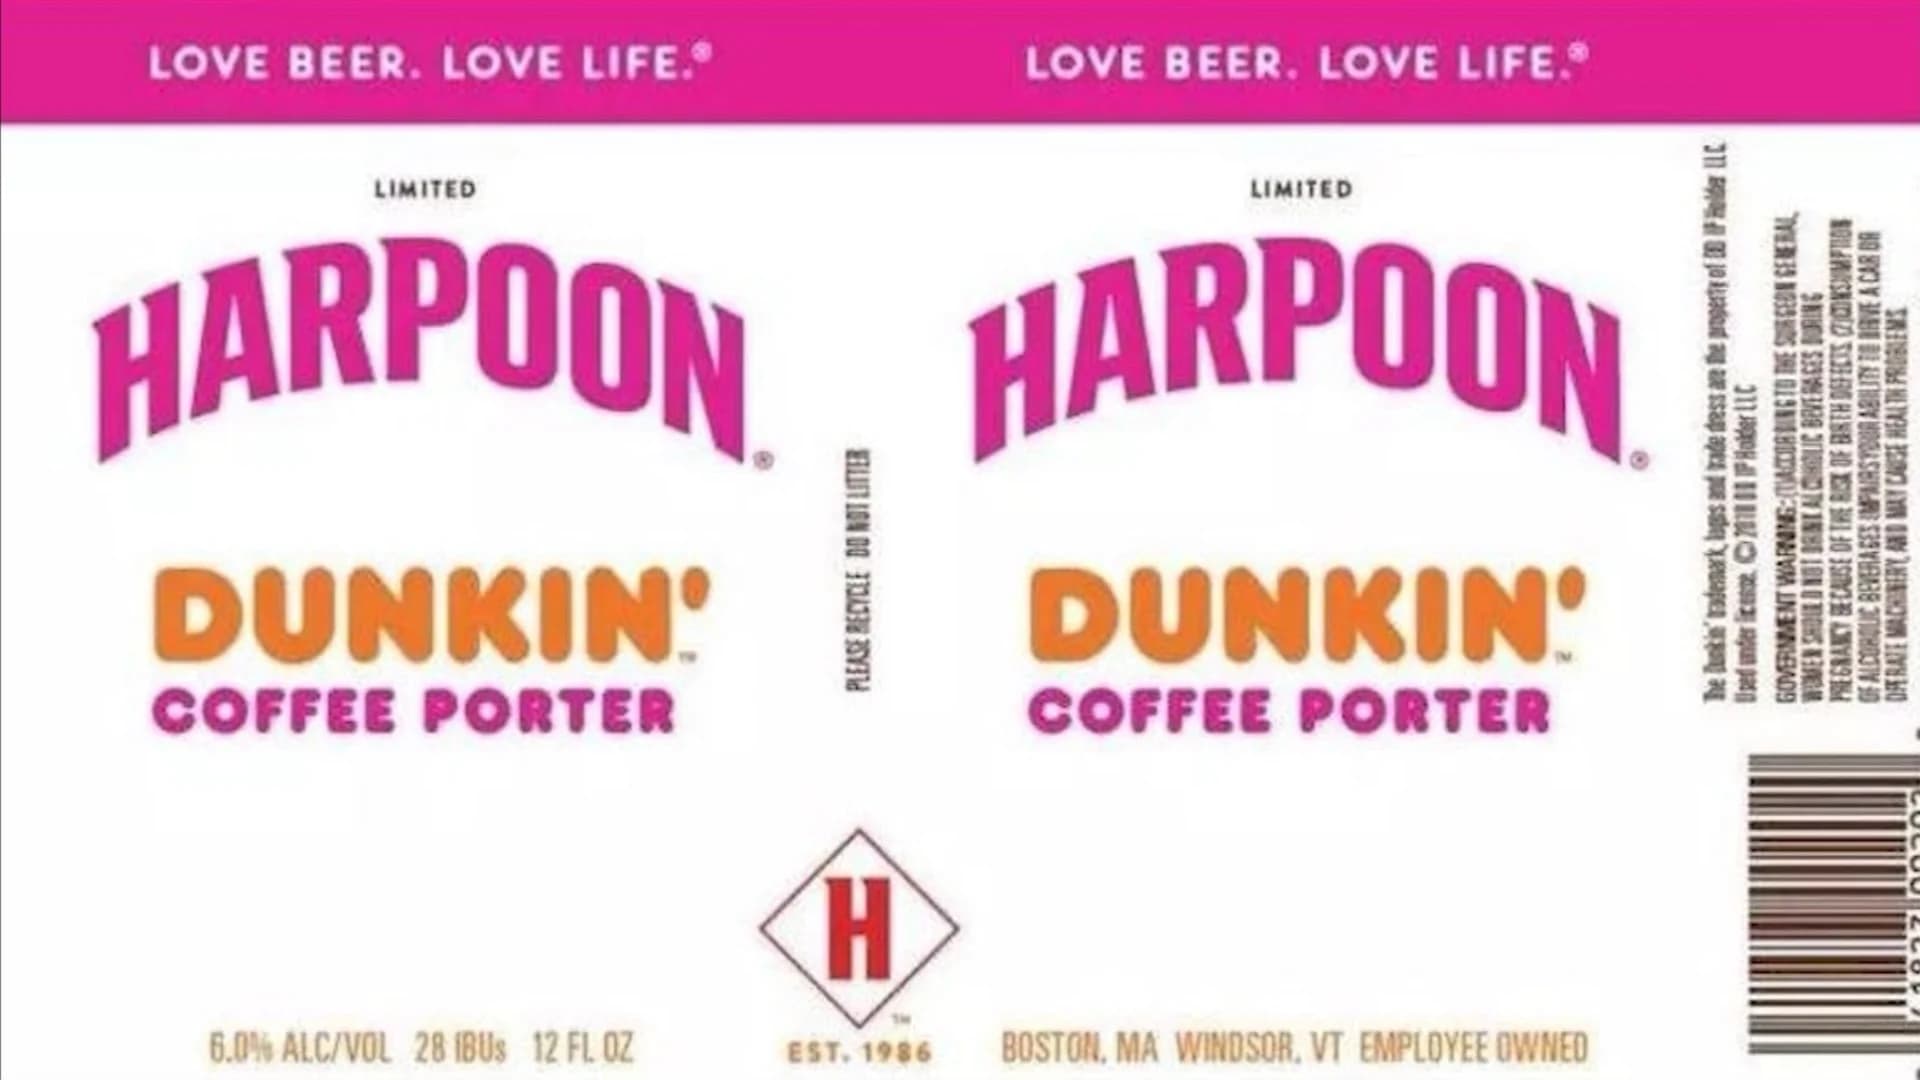 Dunkin' Donuts, brewery partner up to release own beer